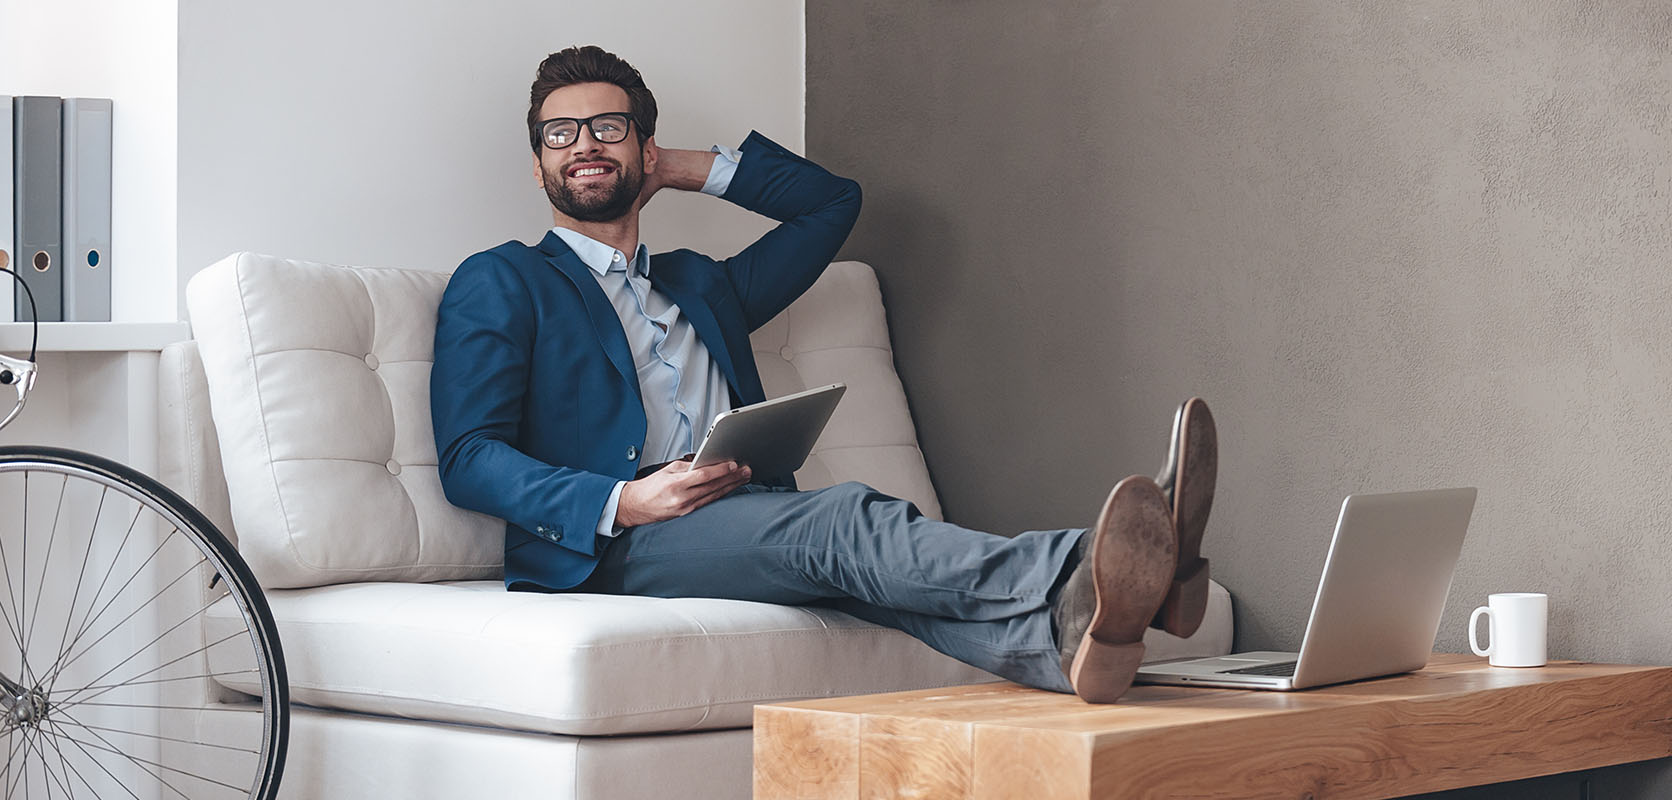 Relaxed business man working on laptop after buying weed online from Low Price Bud online dispensary in Canada to buy weed online.